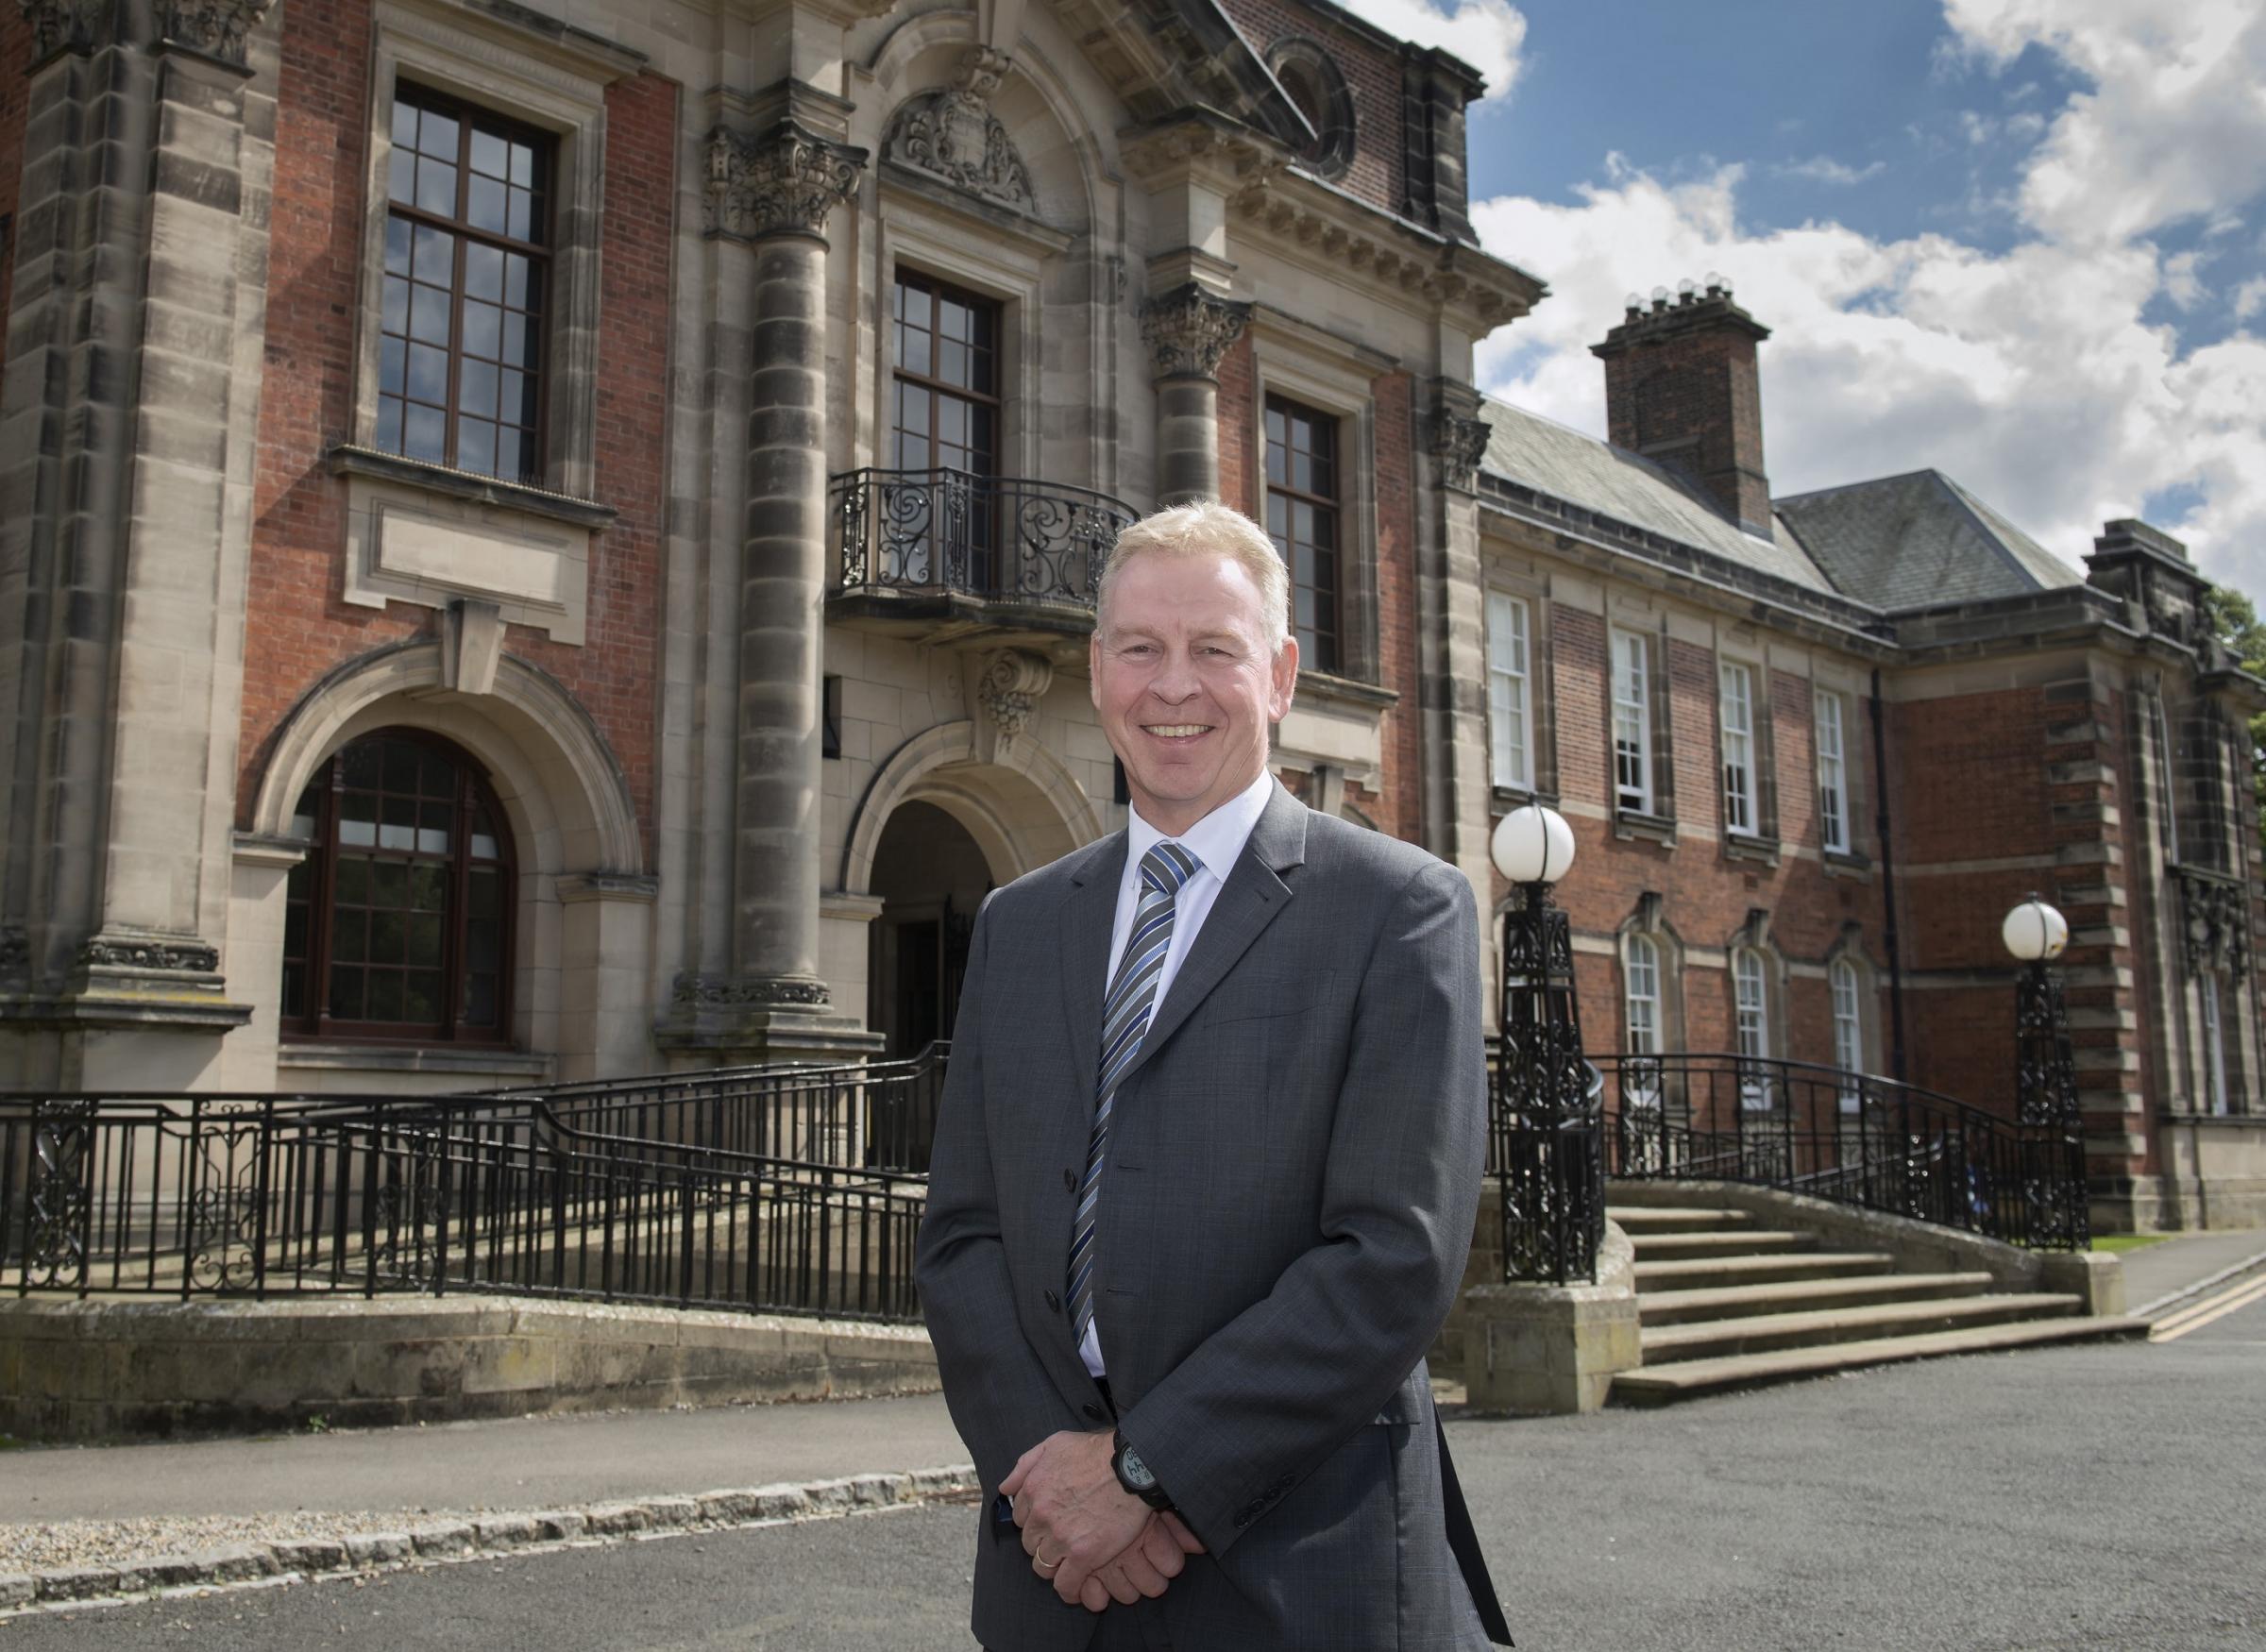 The chairman of the North Yorkshire Rural Taskforce, Richard Flinton, who is also the chief executive of North Yorkshire County Council